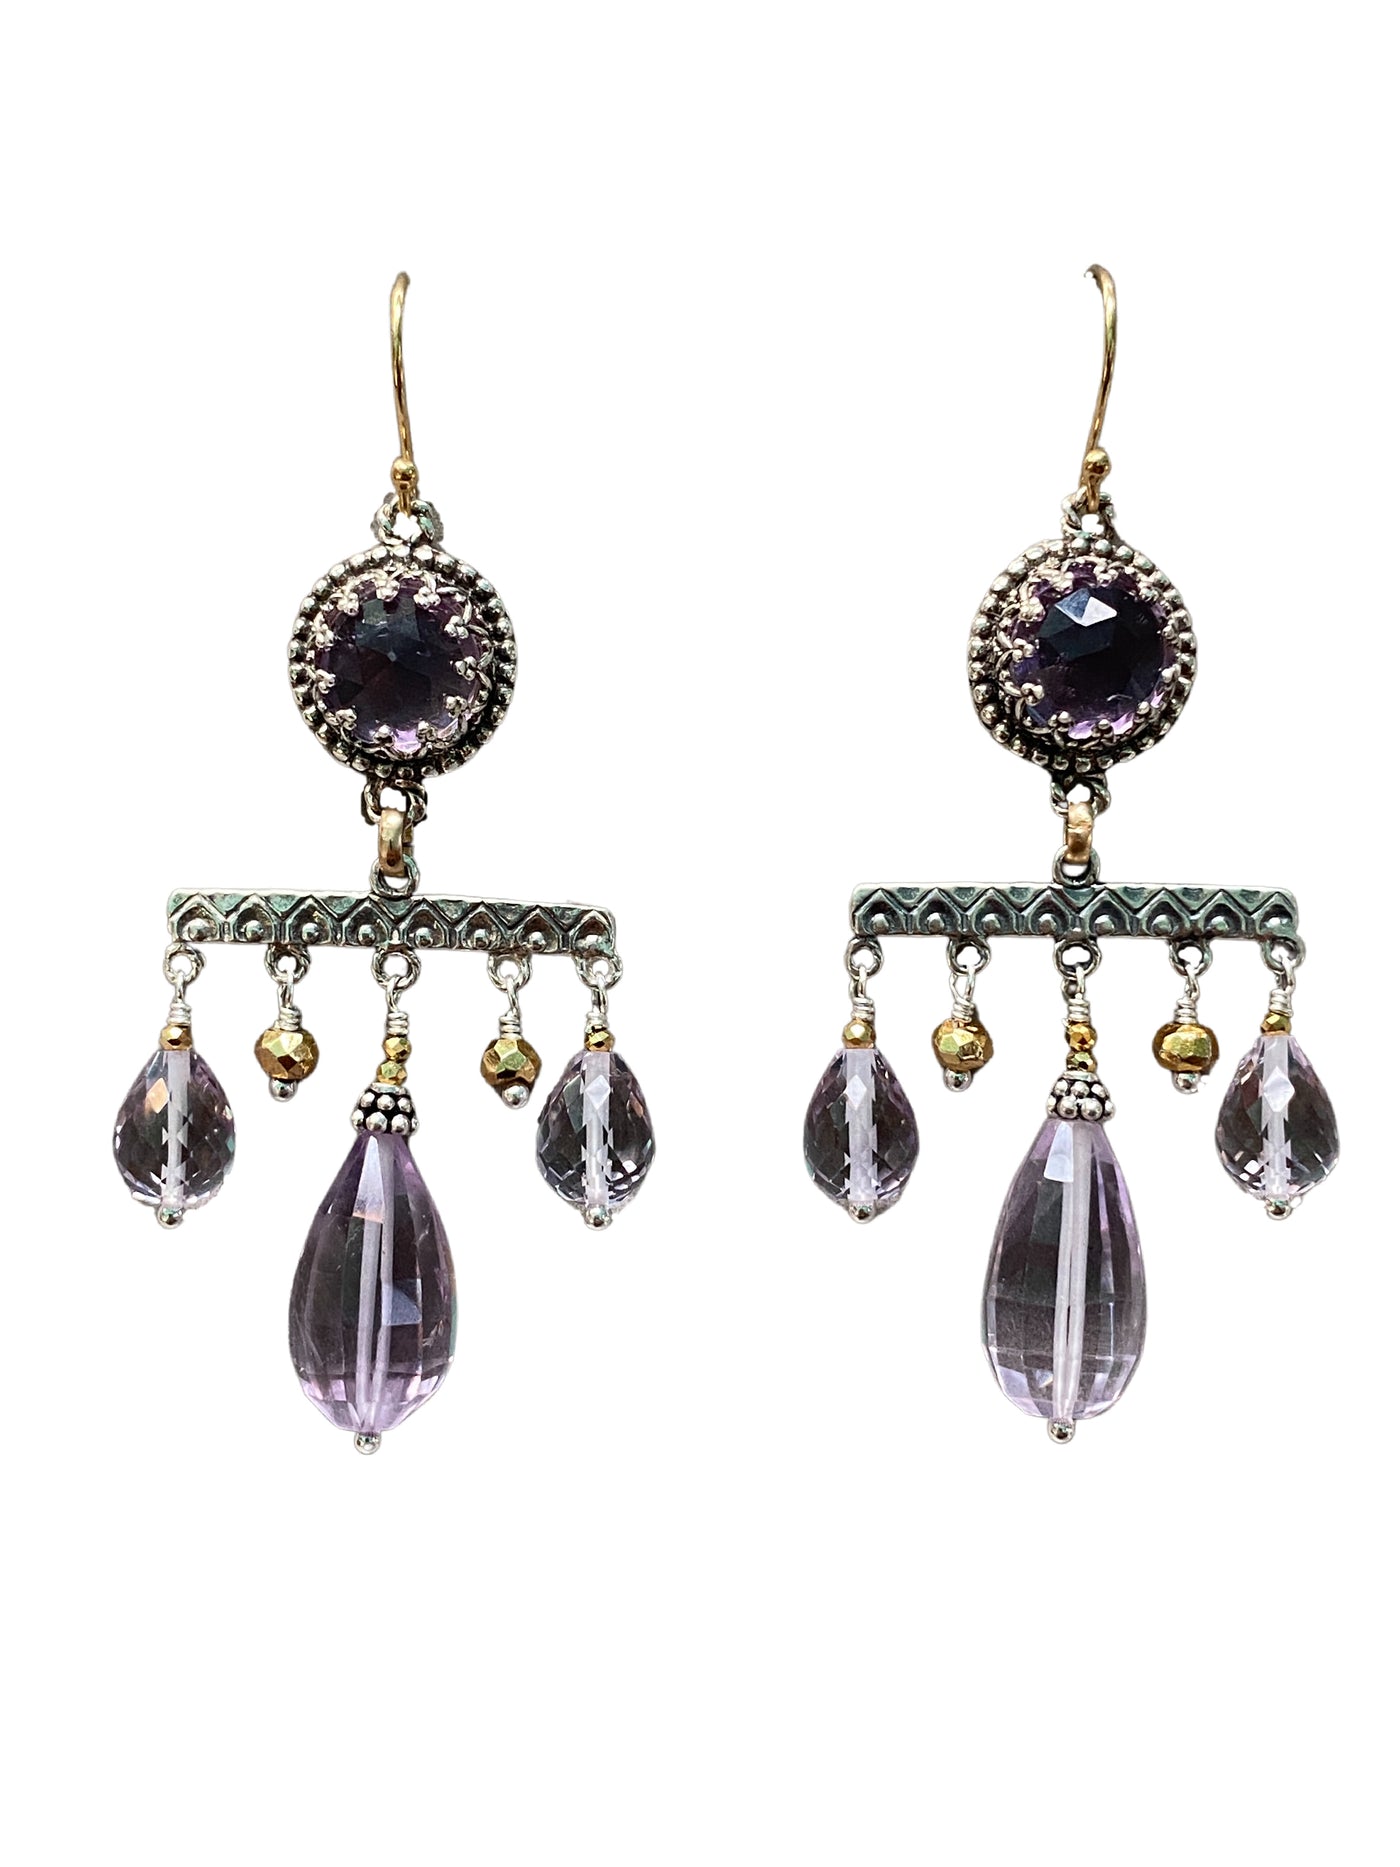 Three Drop Chandeliers - Lavender Amethyst, Silver and Gold-Fill Earrings